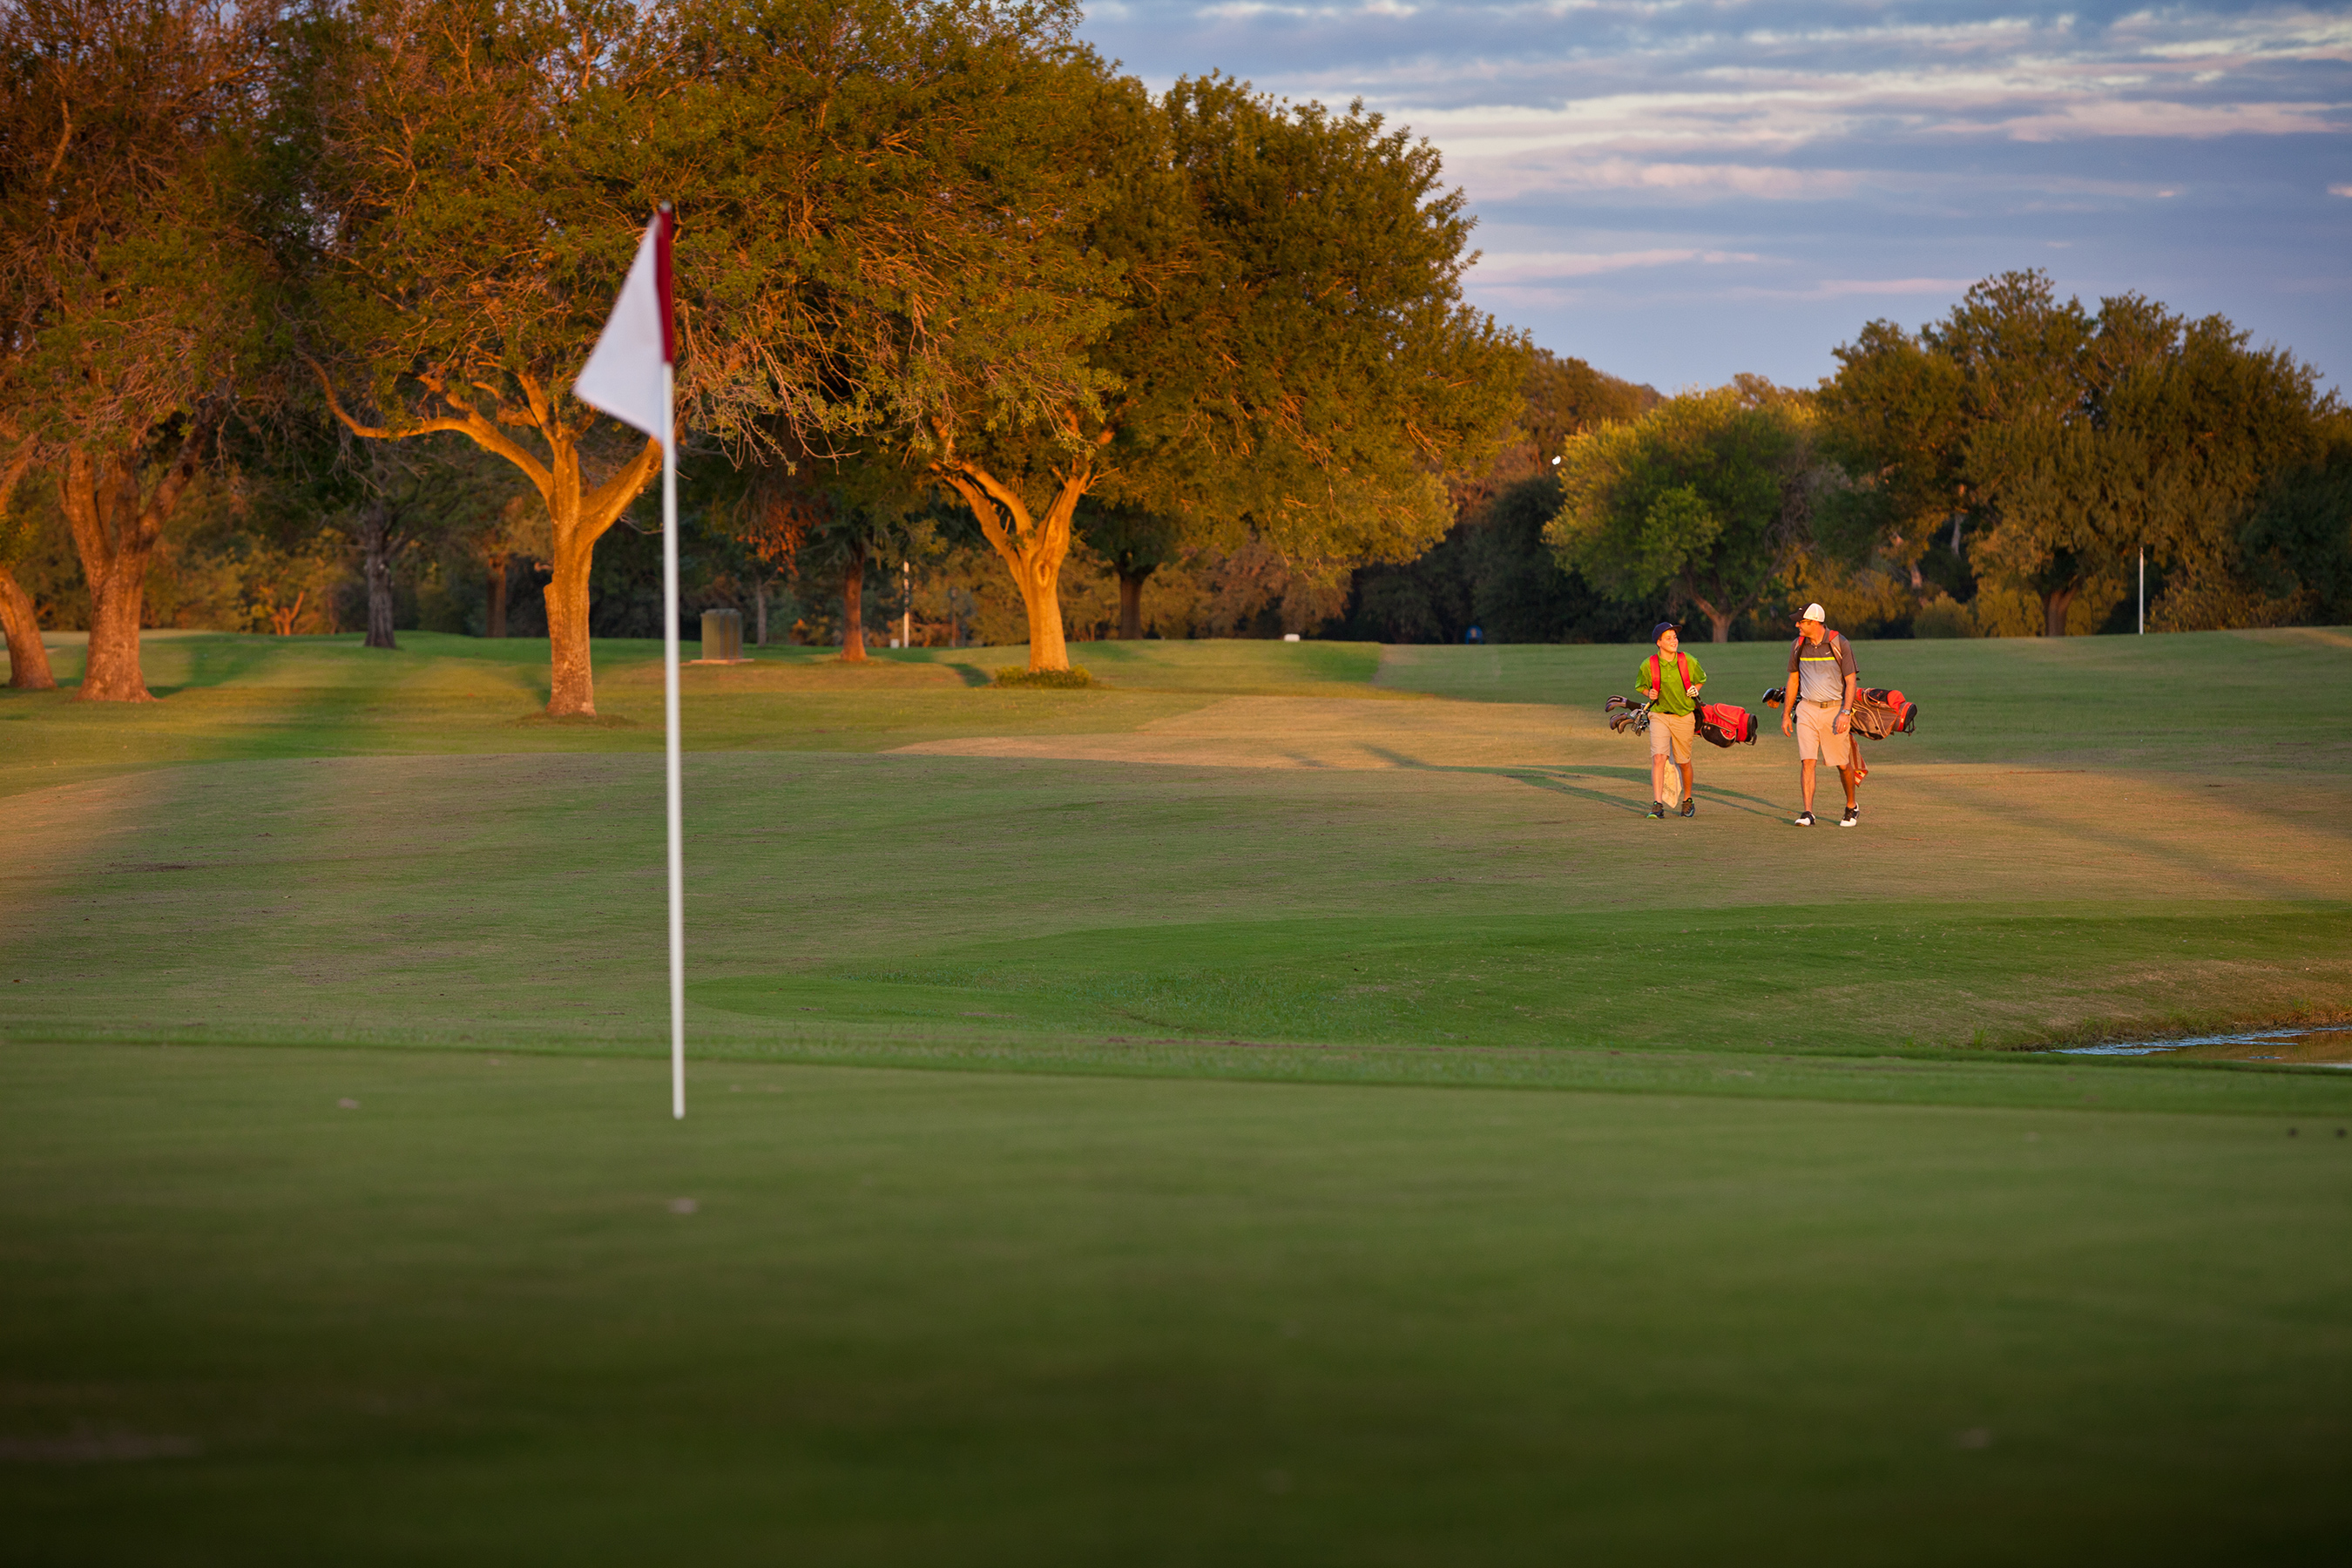 Nestled along the Comal River, Landa Park Golf Course covers 122-acres with sculpted fairways, strategically placed bunkers and water hazards, along with each holes’ set of four tees, offering an enjoyable outing to experts and novices alike.